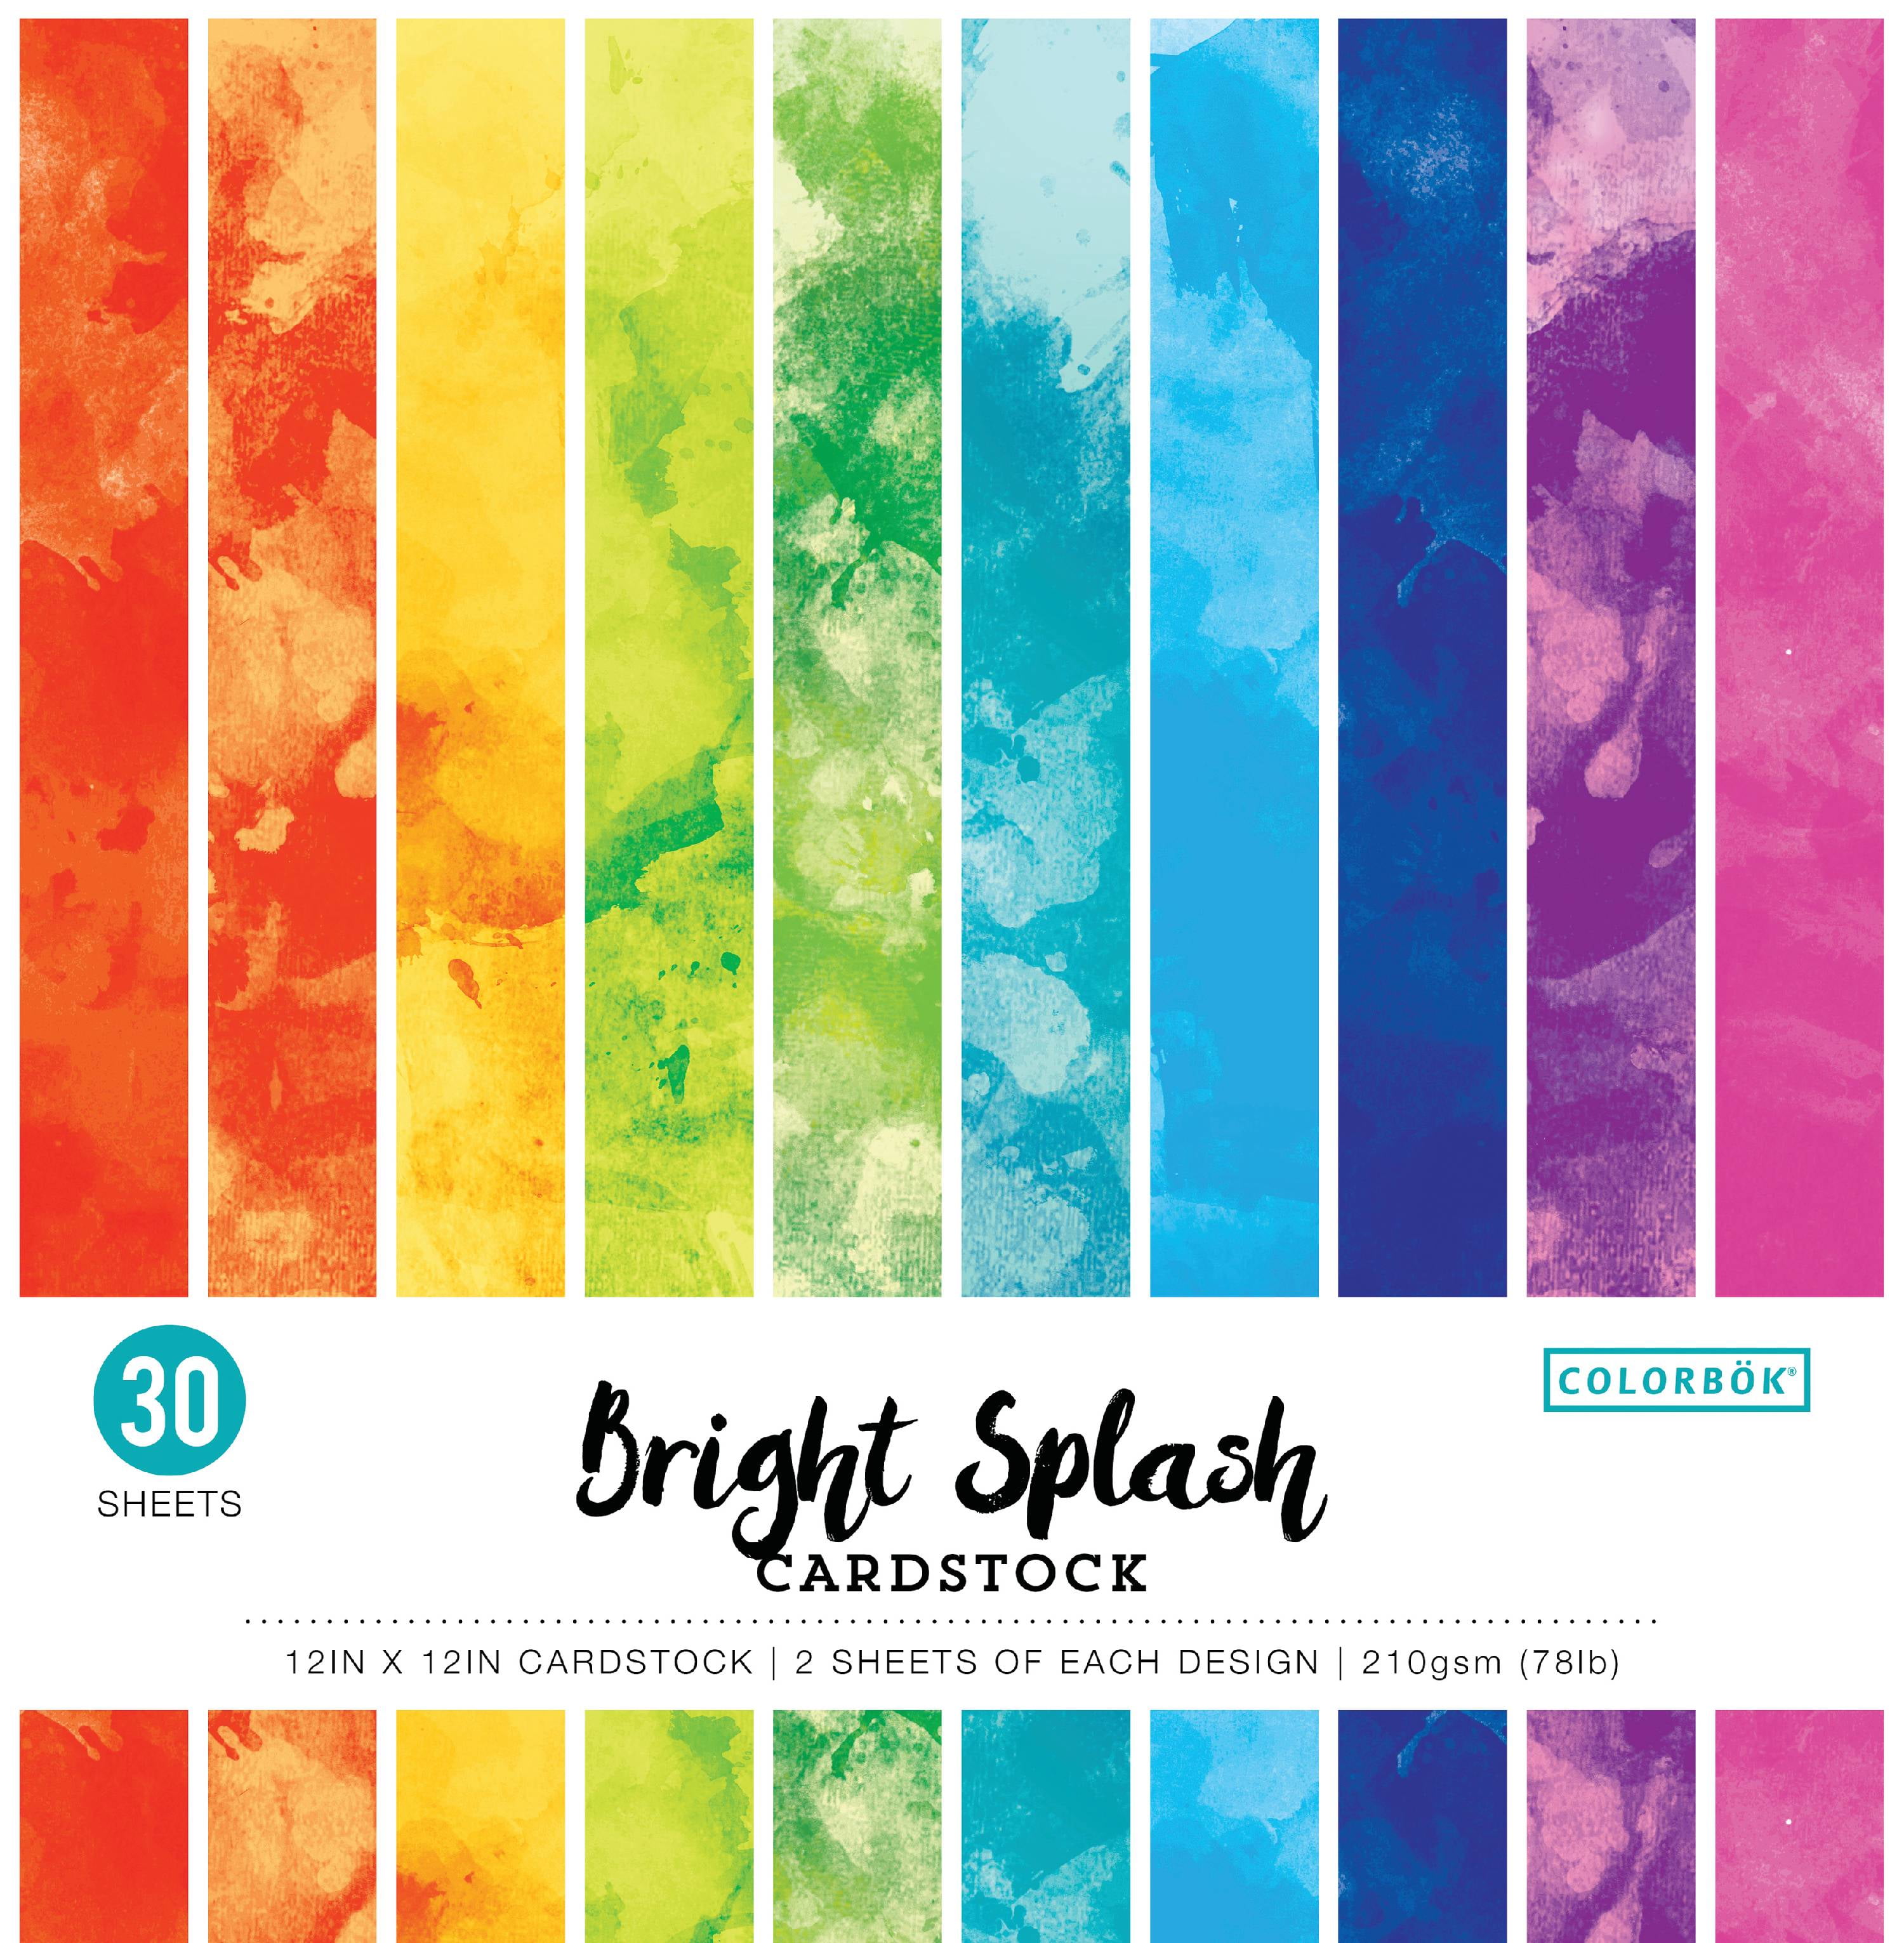 Astrobrights Colored Cardstock, 8.5 x 11, 65 lb./176 gsm, Bright  Assortment, 50 Sheets 